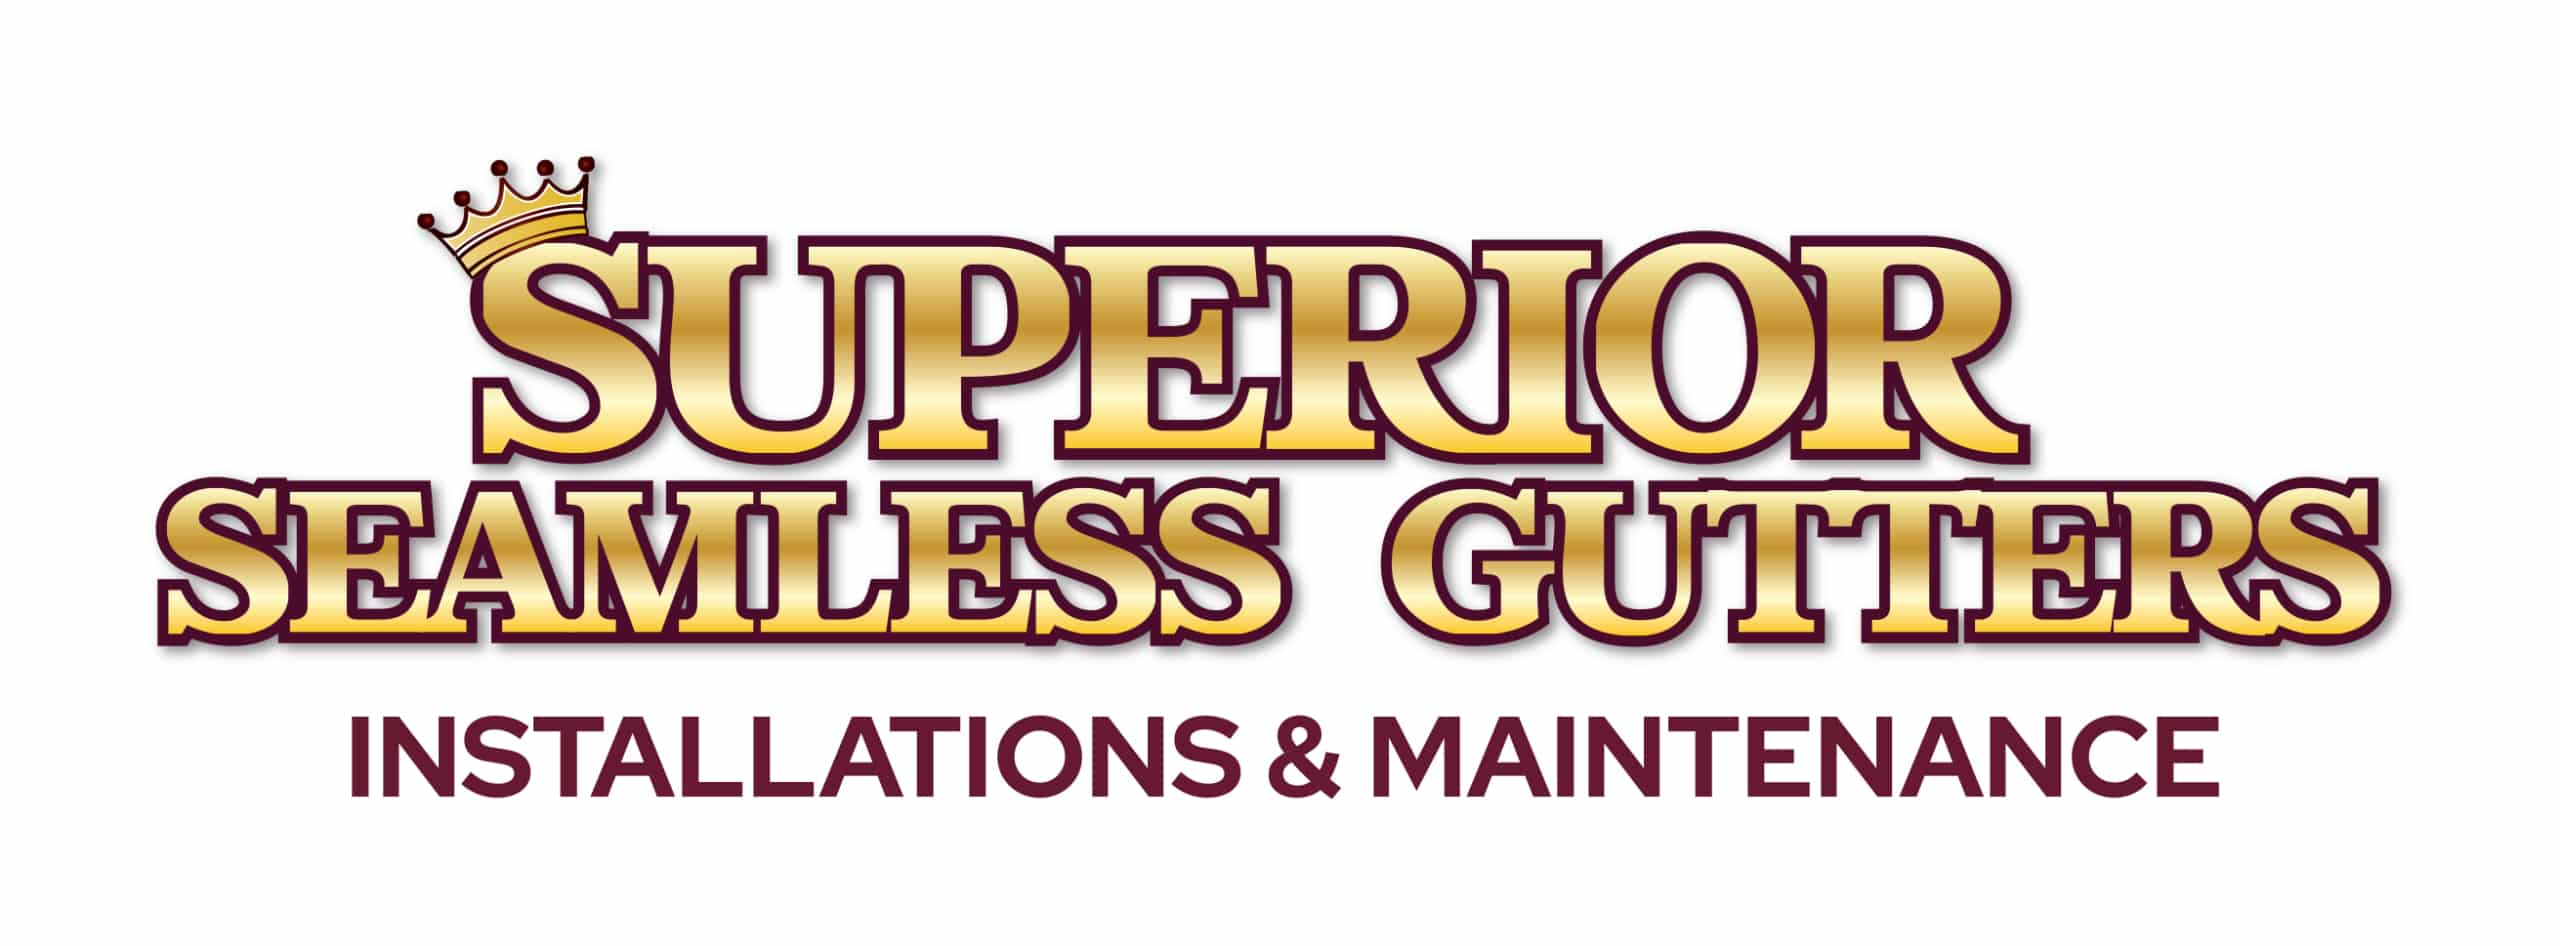 New Gutters, Gutter Cleaning Bergen County NJ | Rockland County NY | Superior Gutters and Roof Shampoo Logo